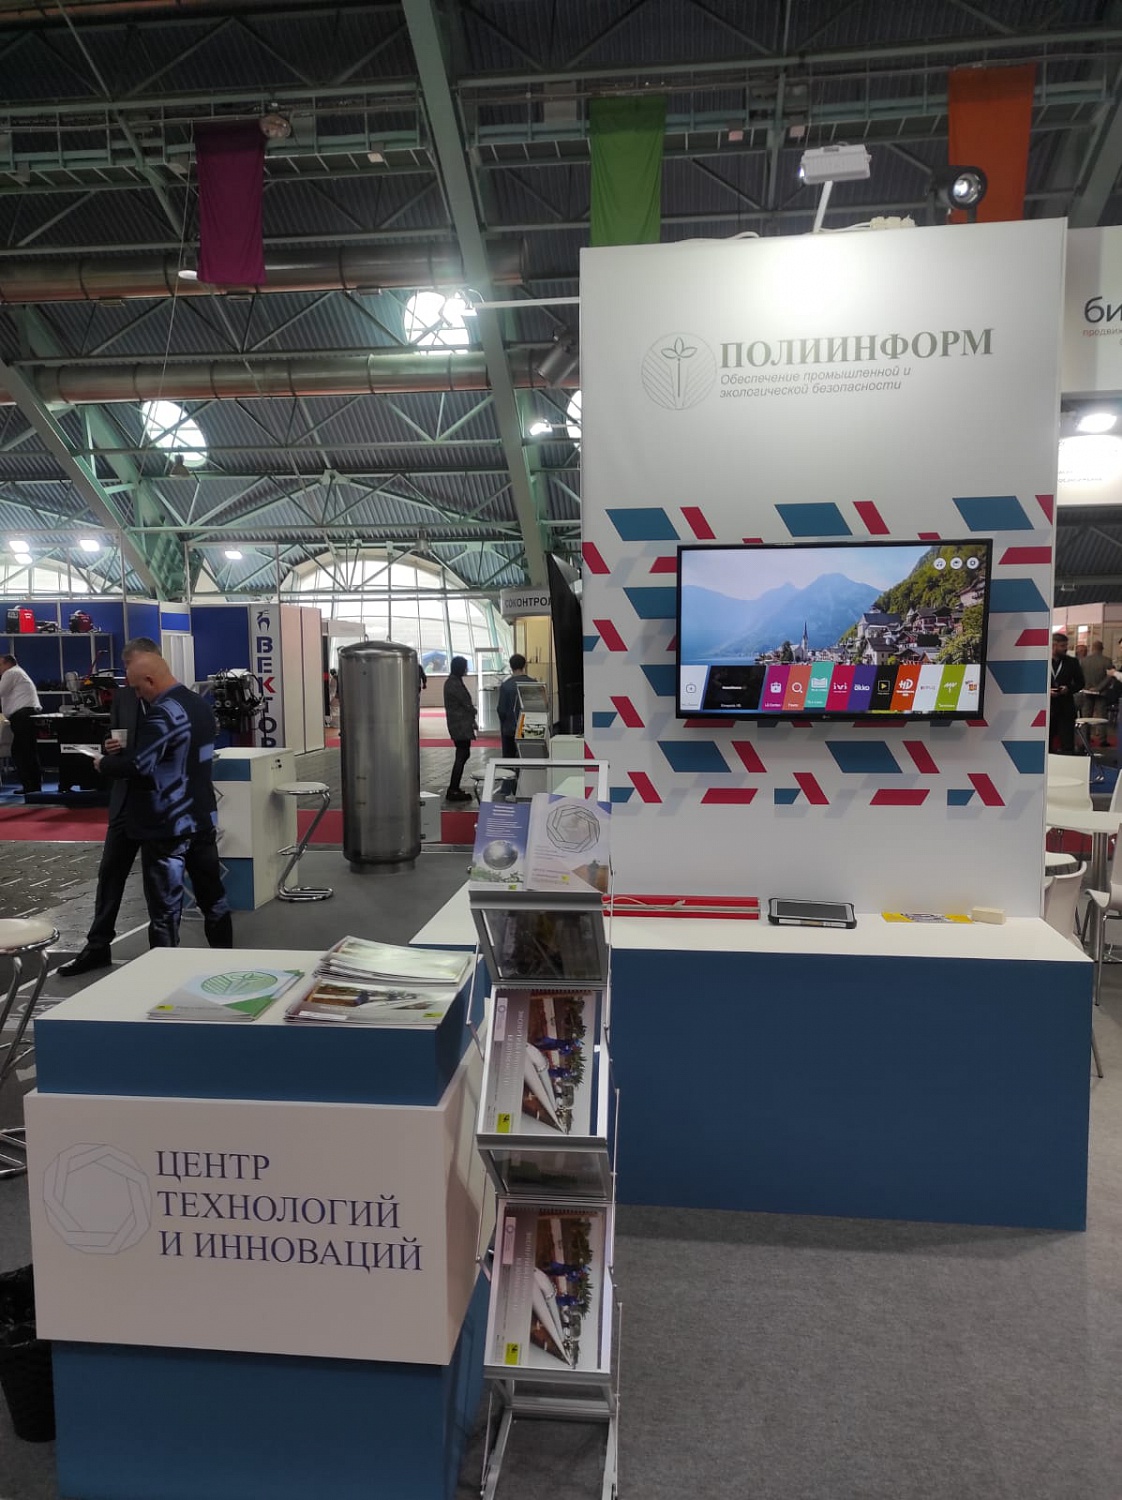 Innovations from St. Petersburg Aim at Belarus